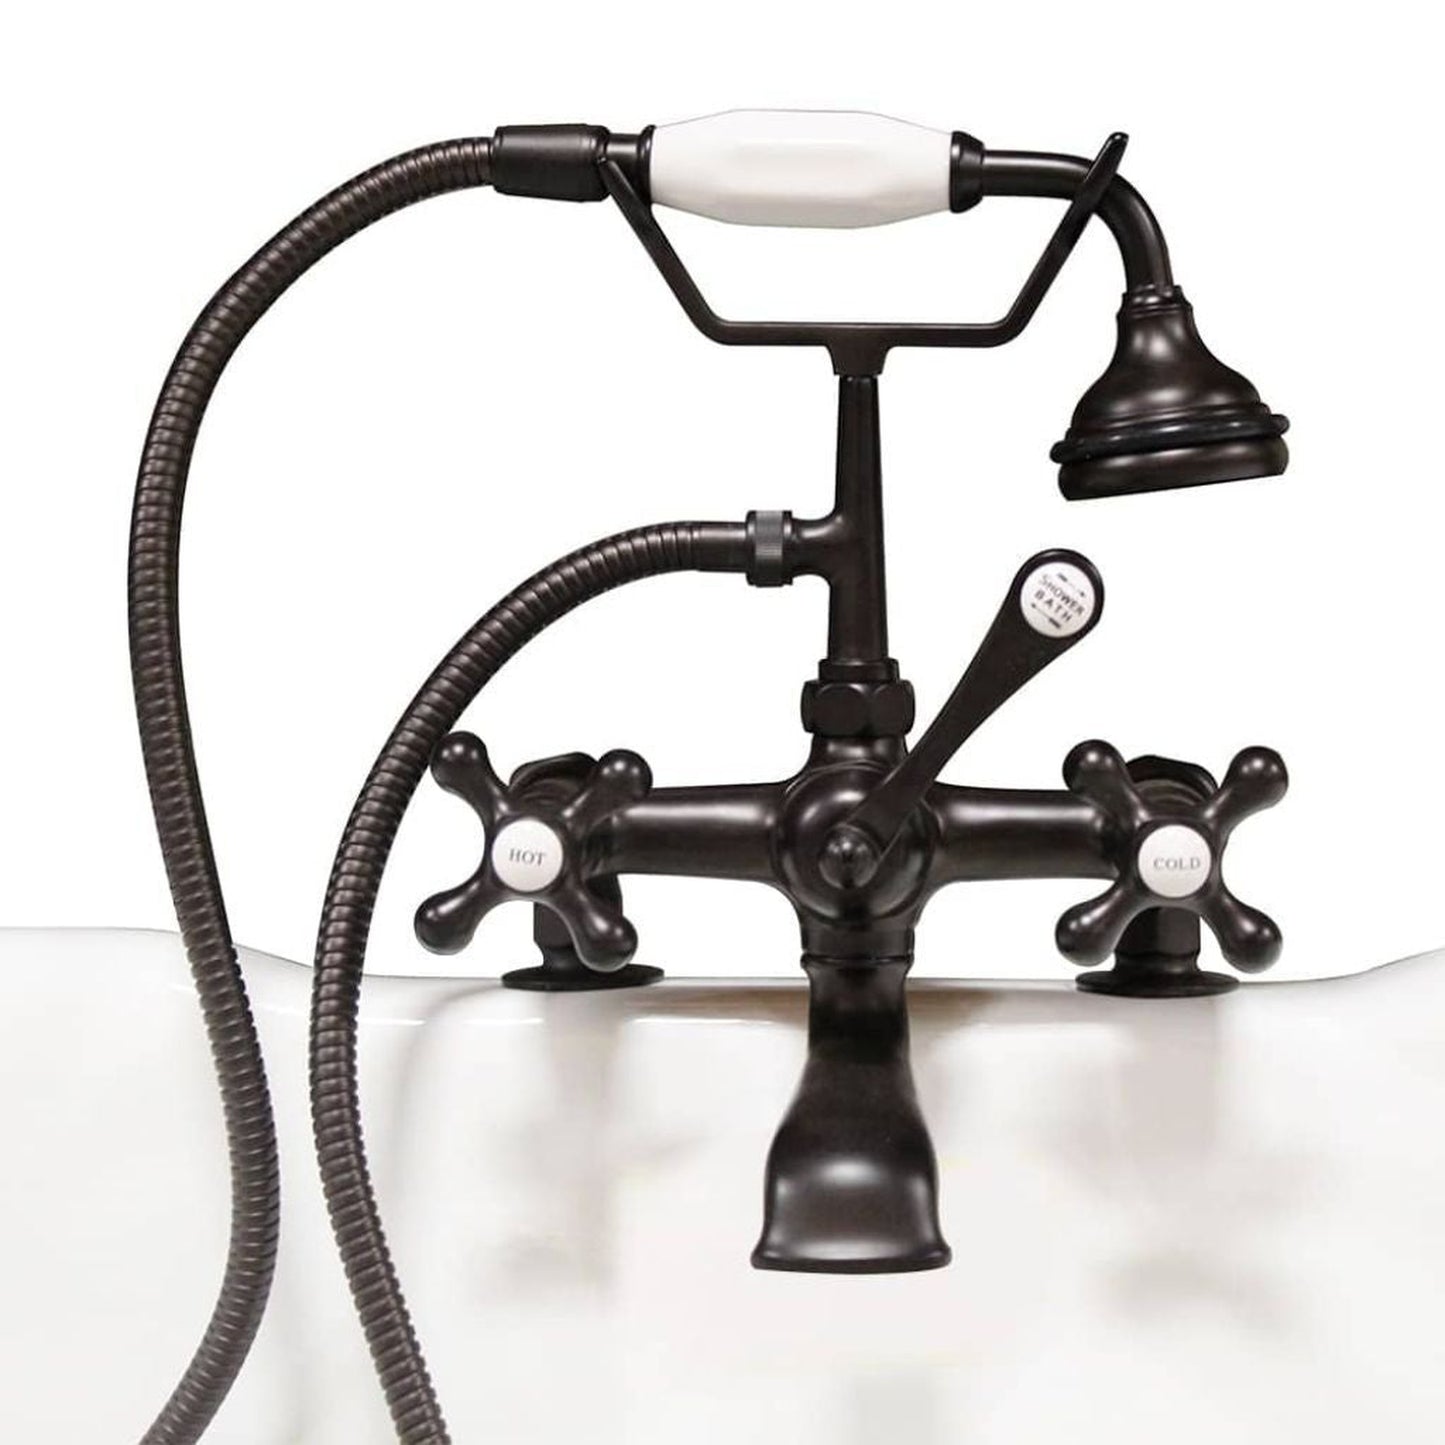 Cambridge Plumbing 2" Risers Oil Rubbed Bronze Deck Mount British Telephone Style Faucet With Hand Held Shower